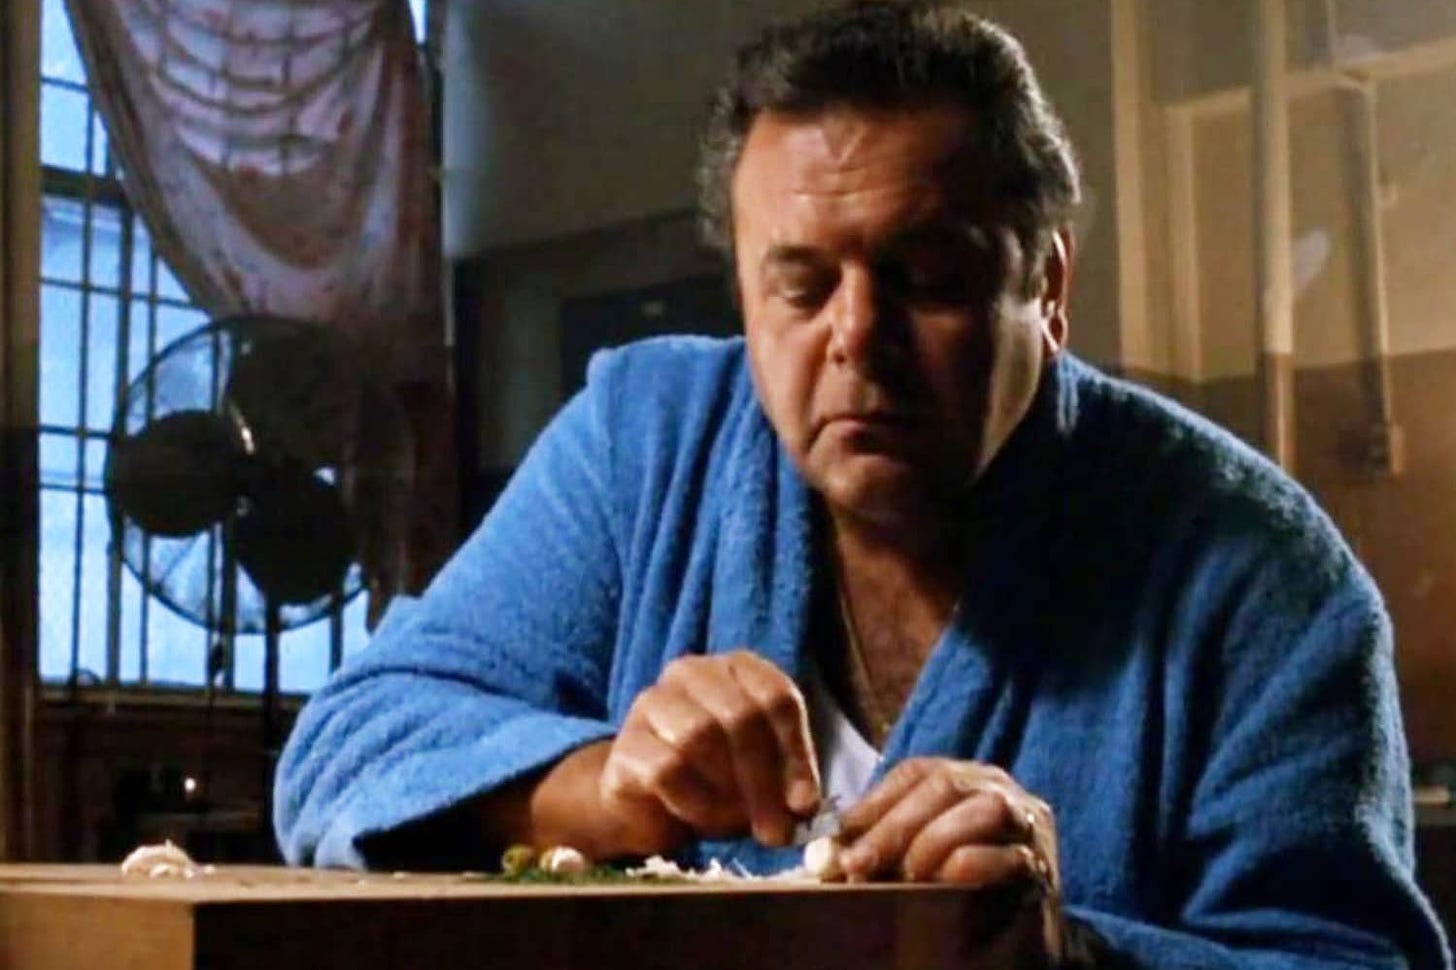 Paul Sorvino slicing garlic with a razor blade in Goodfellas was the most  mobster scene of them all | British GQ